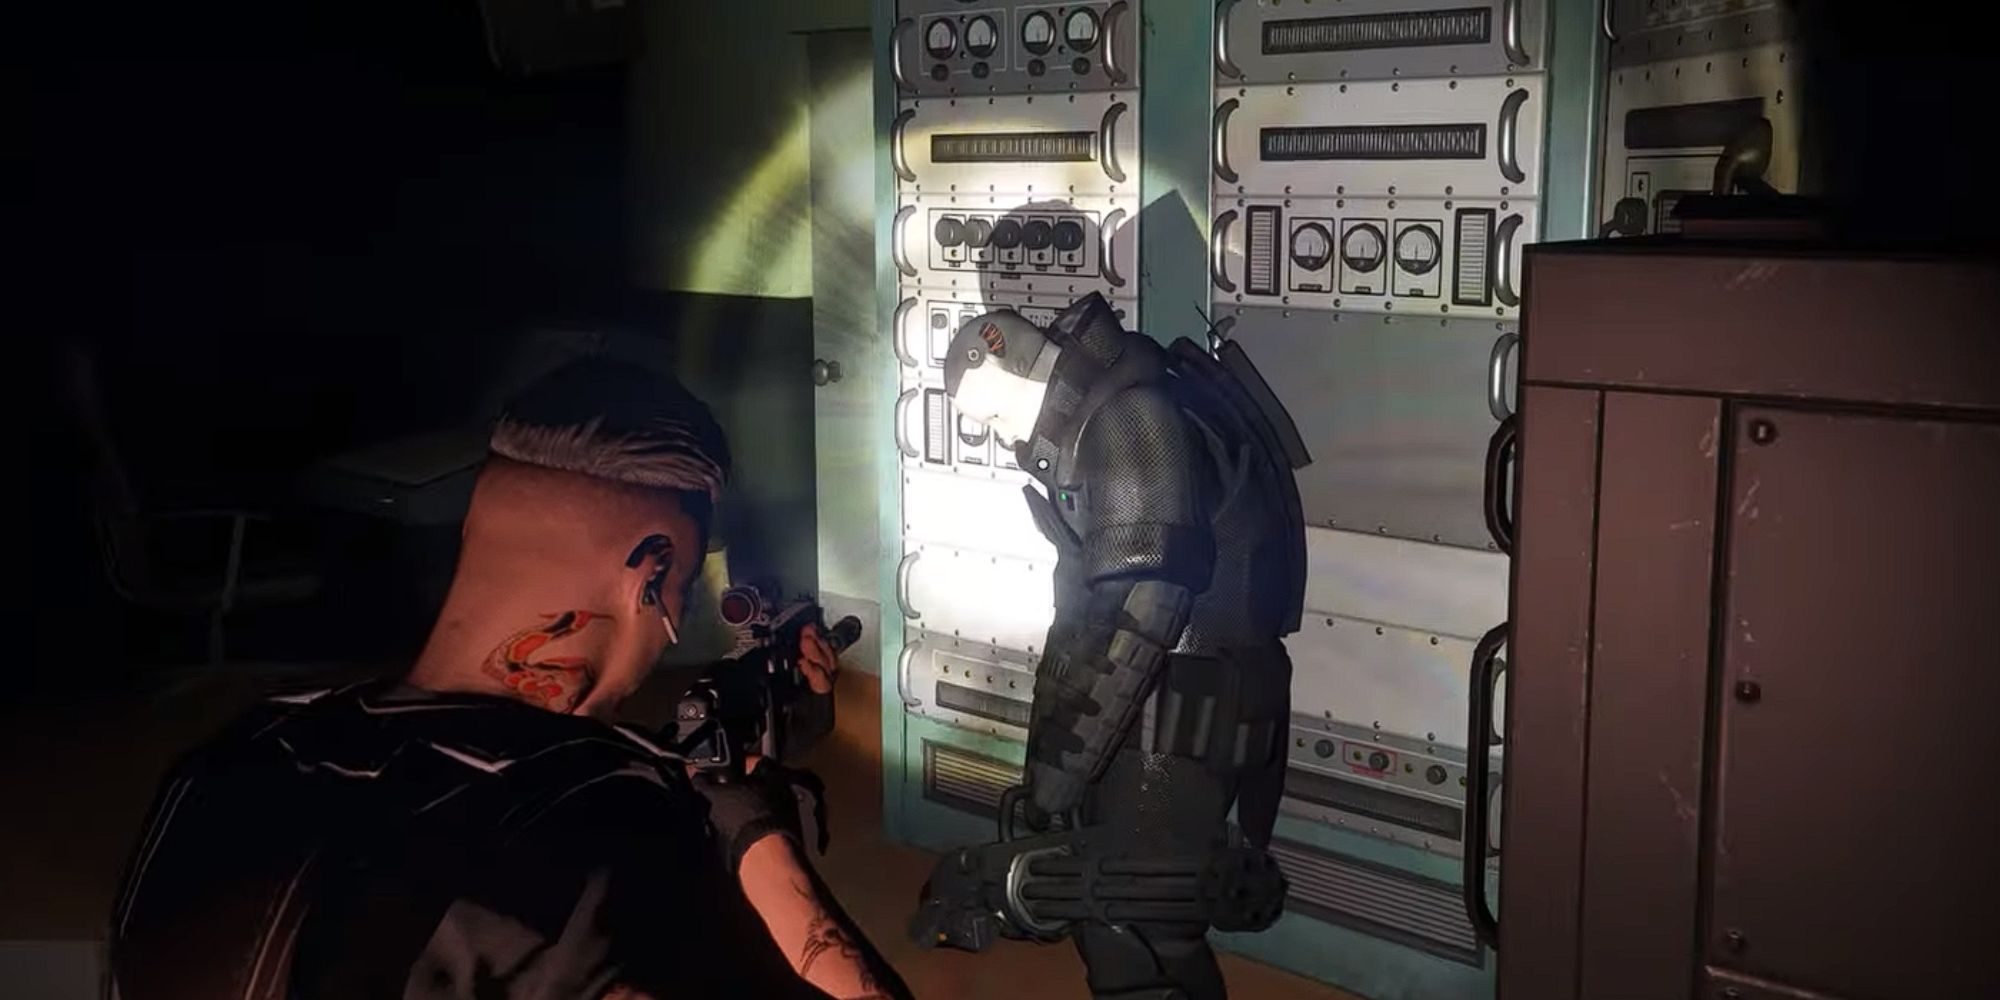 Player flashes light and aims gun at a sleeping Juggernaut by a corner of the room